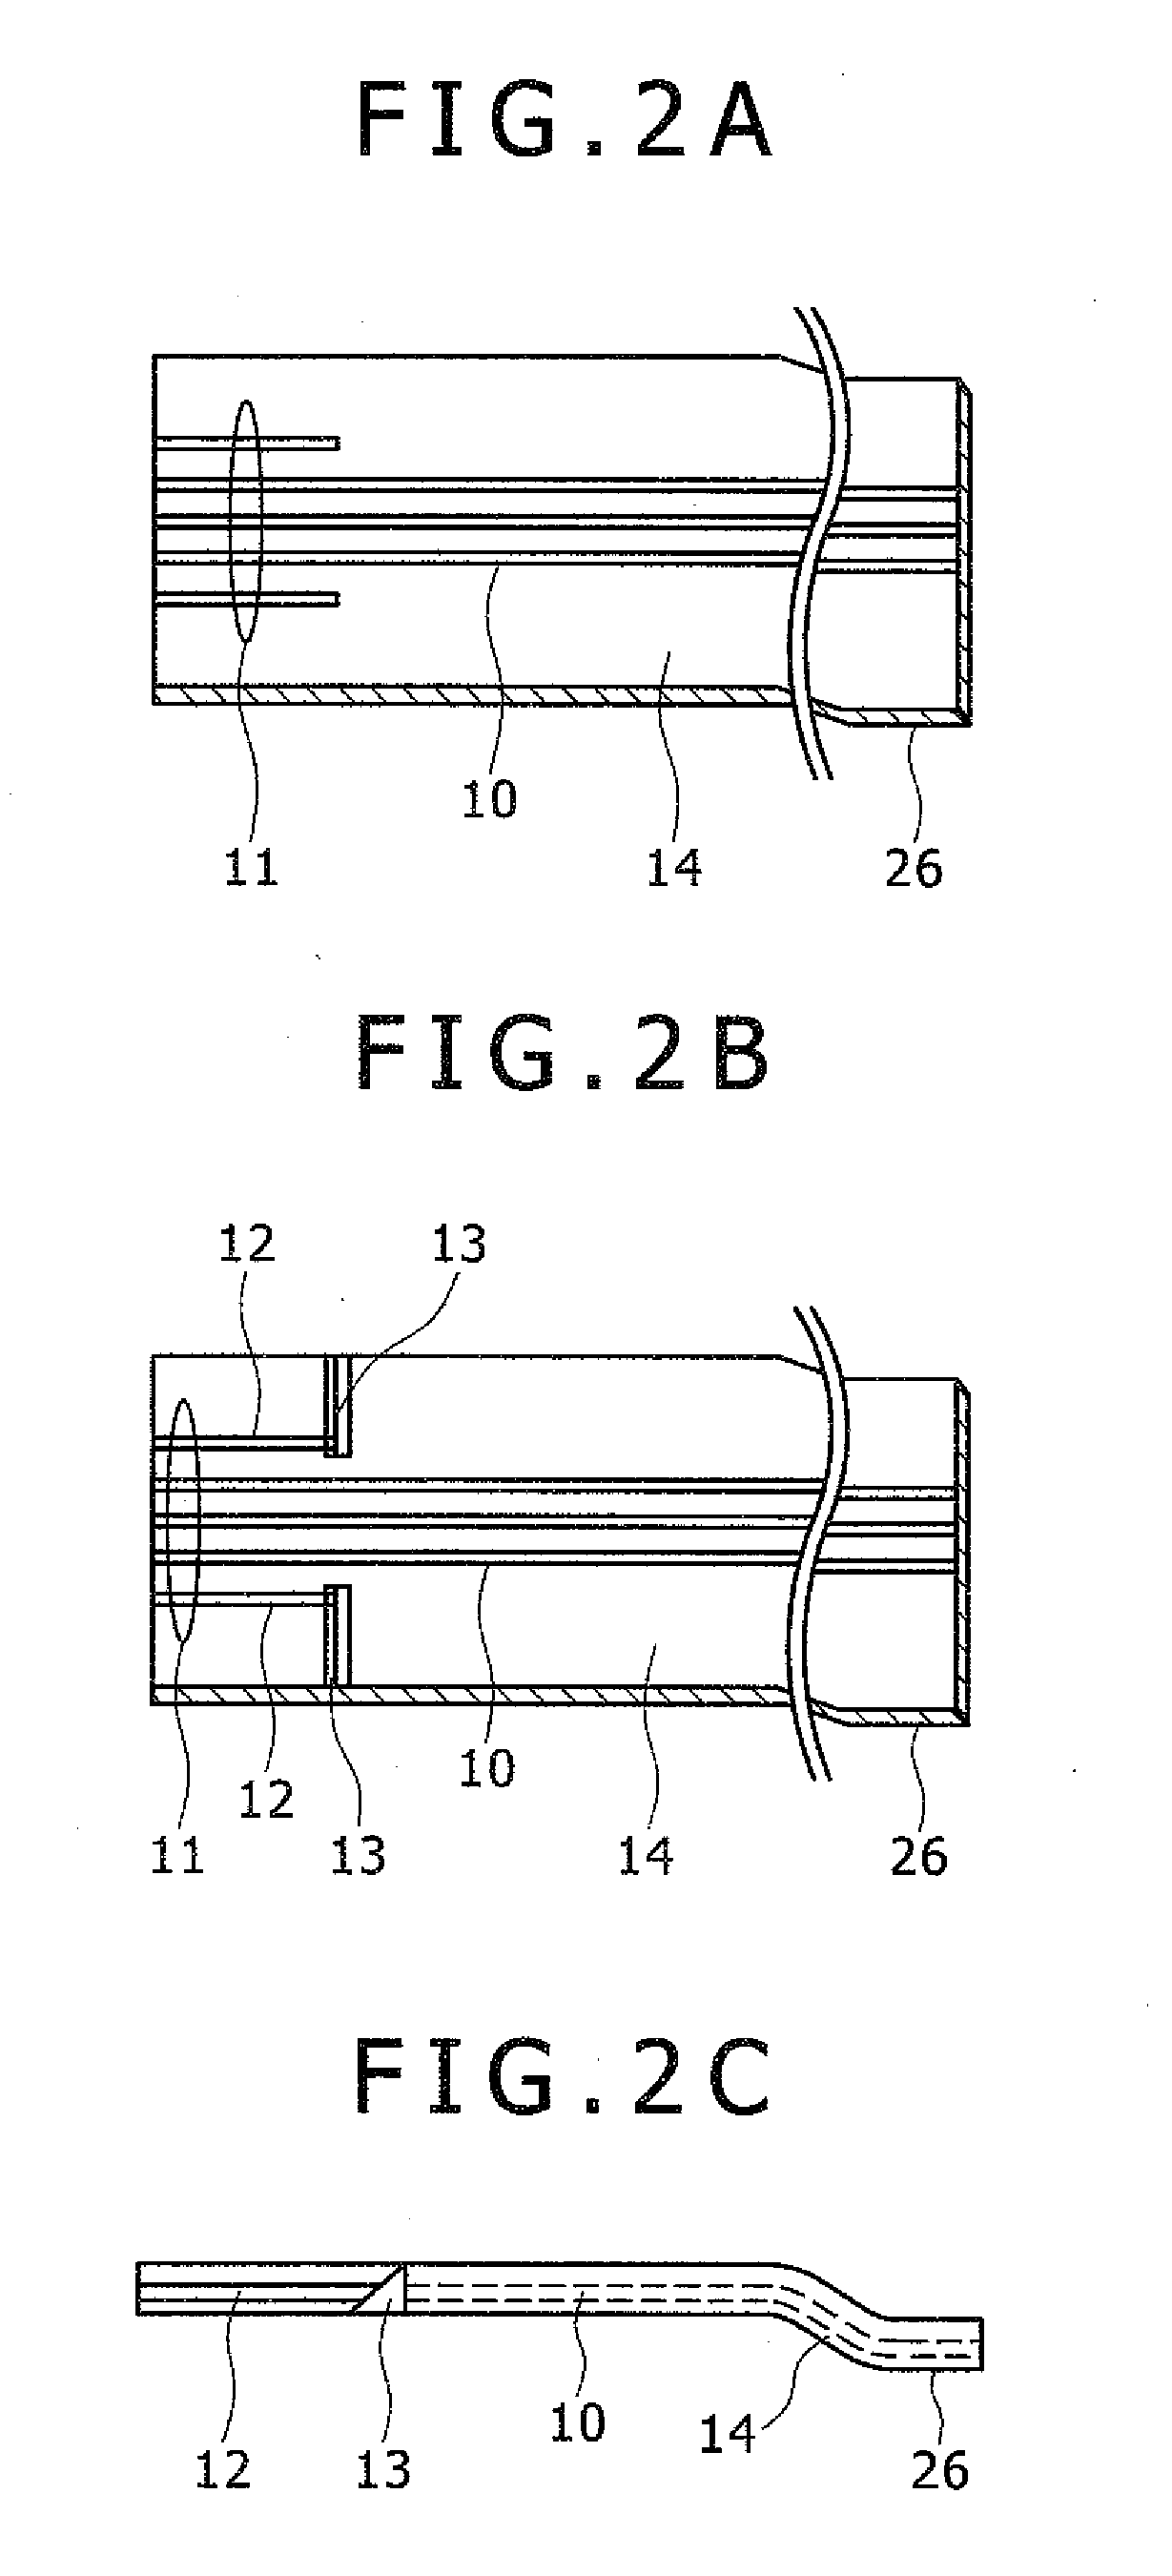 Planar optical waveguide array module and method of fabricating the same